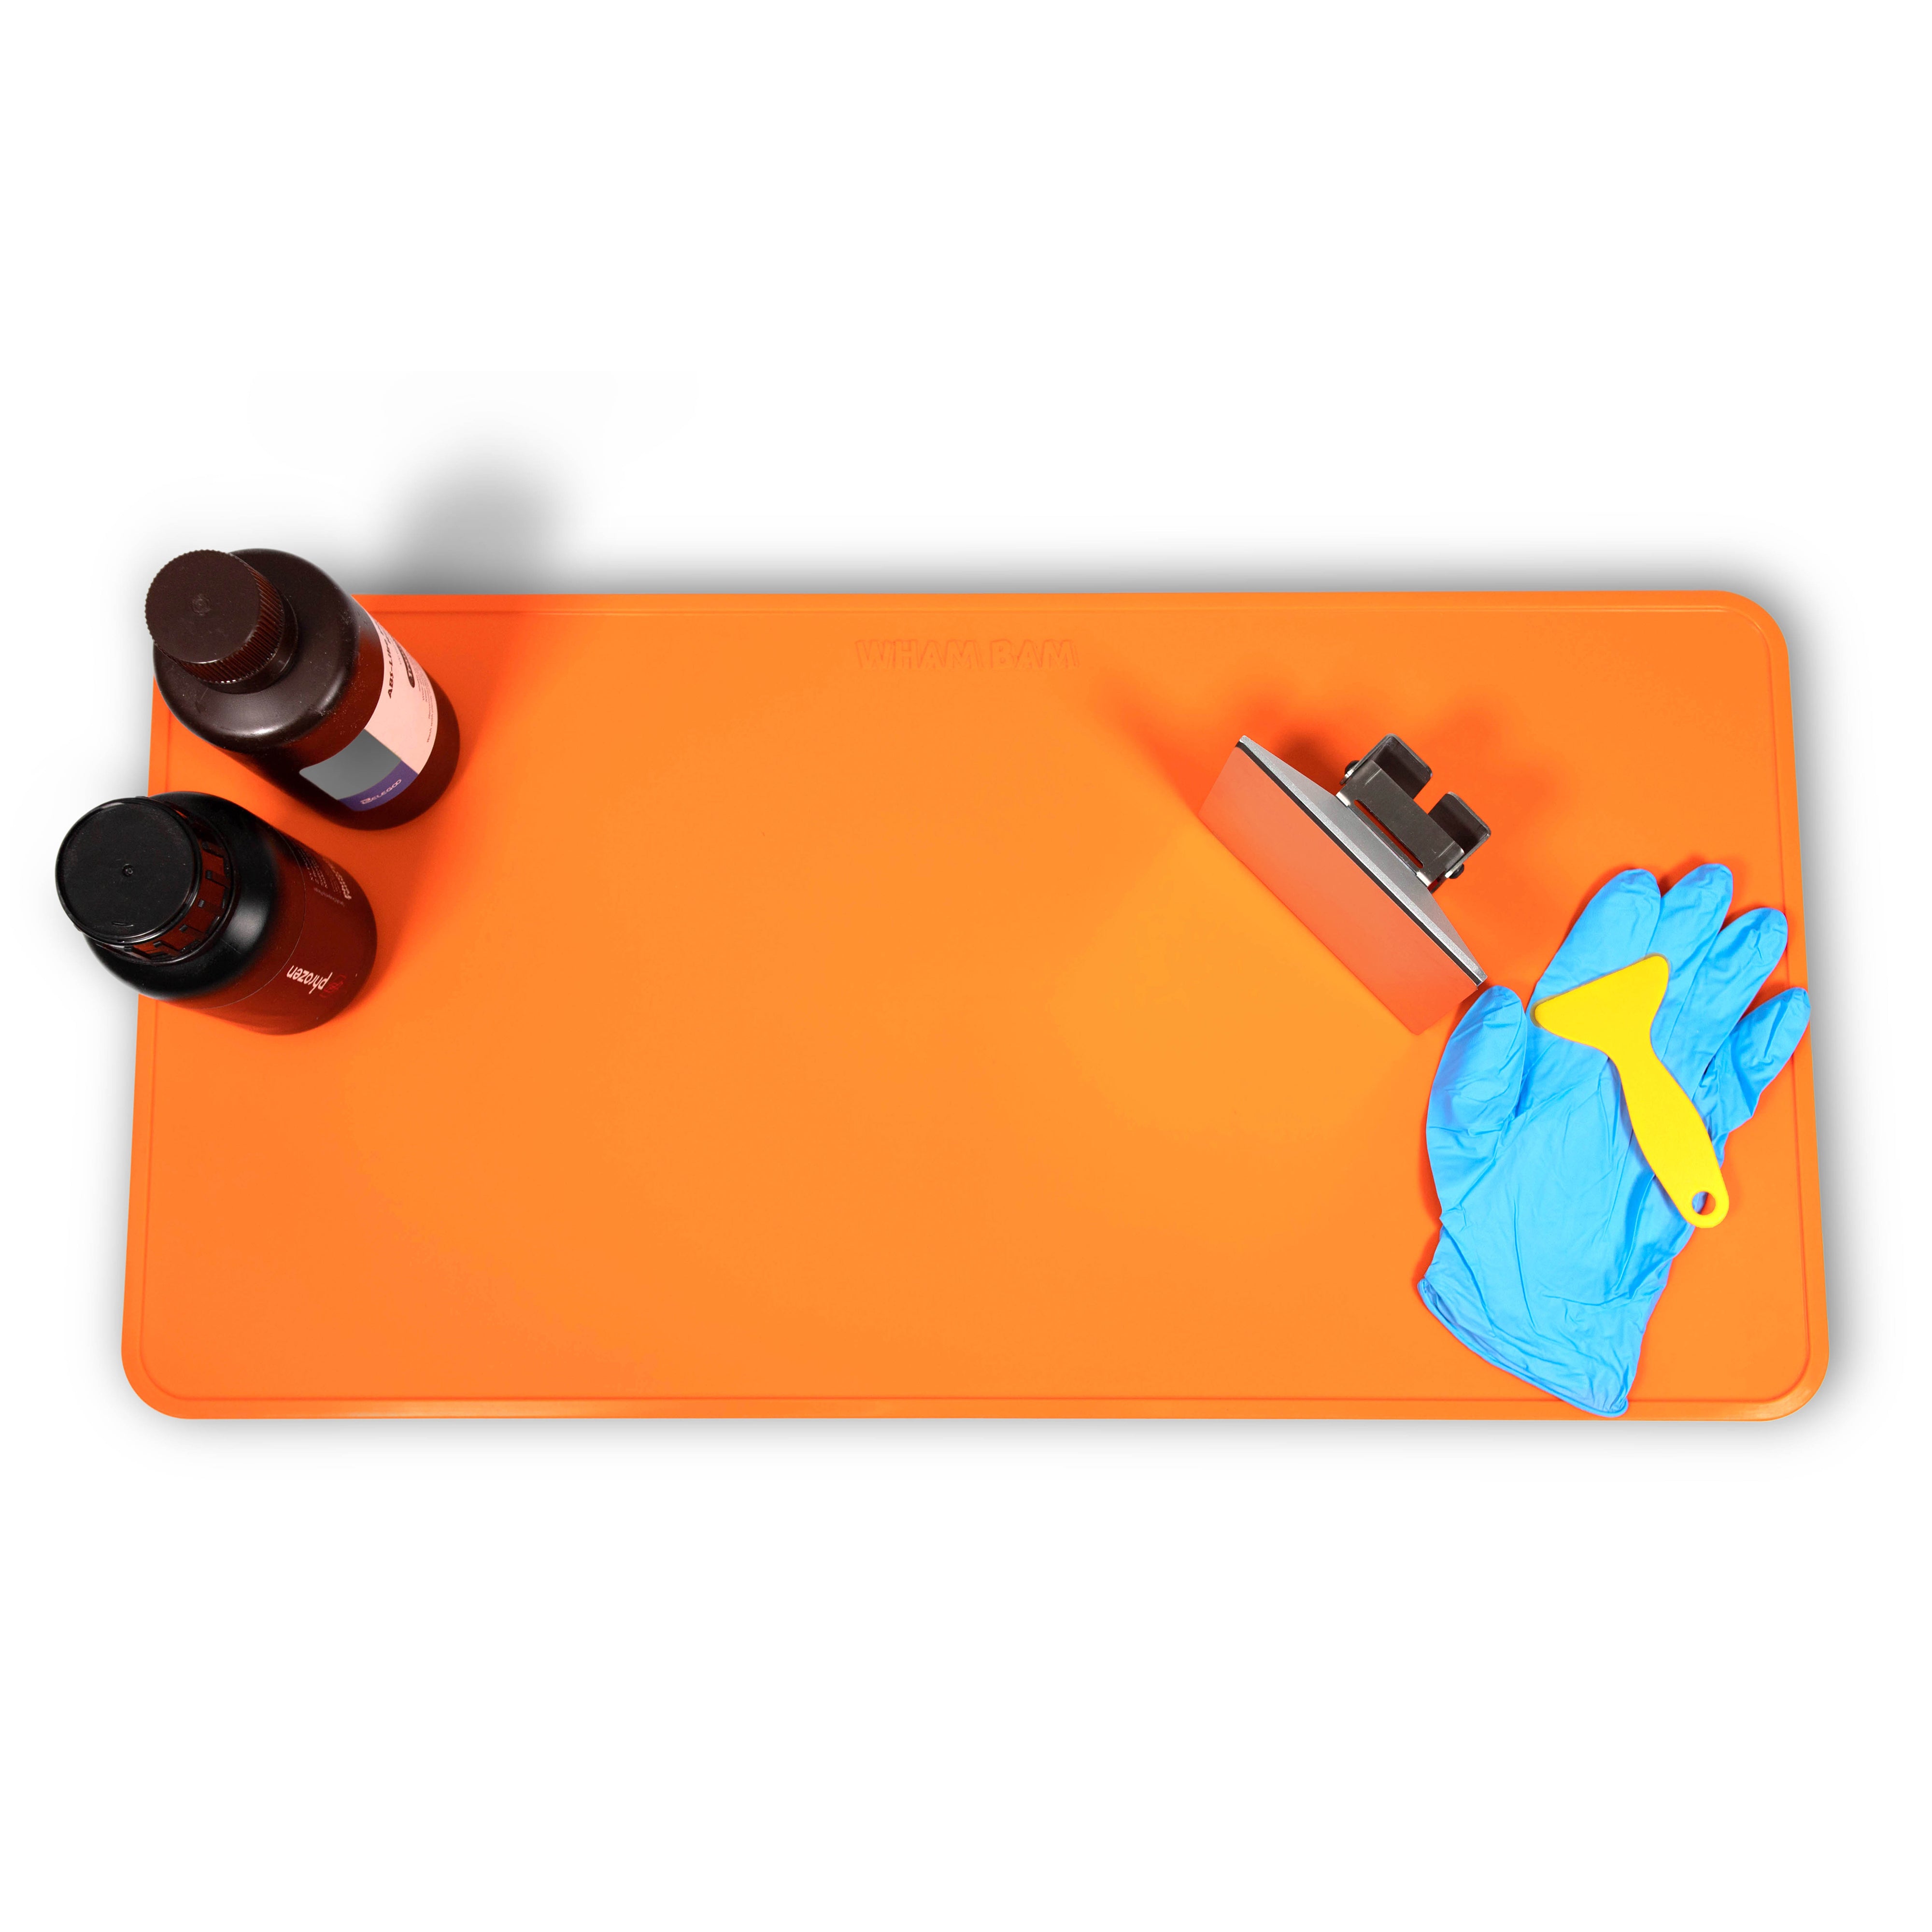 Imdinnogo BCZAMD Large Silicone Mat for 3D Resin Printer 510X510mm/20in Clean-Up or Resin Transfer to Protect Desk Clean Work Mat for DLP SLA LCD Phot